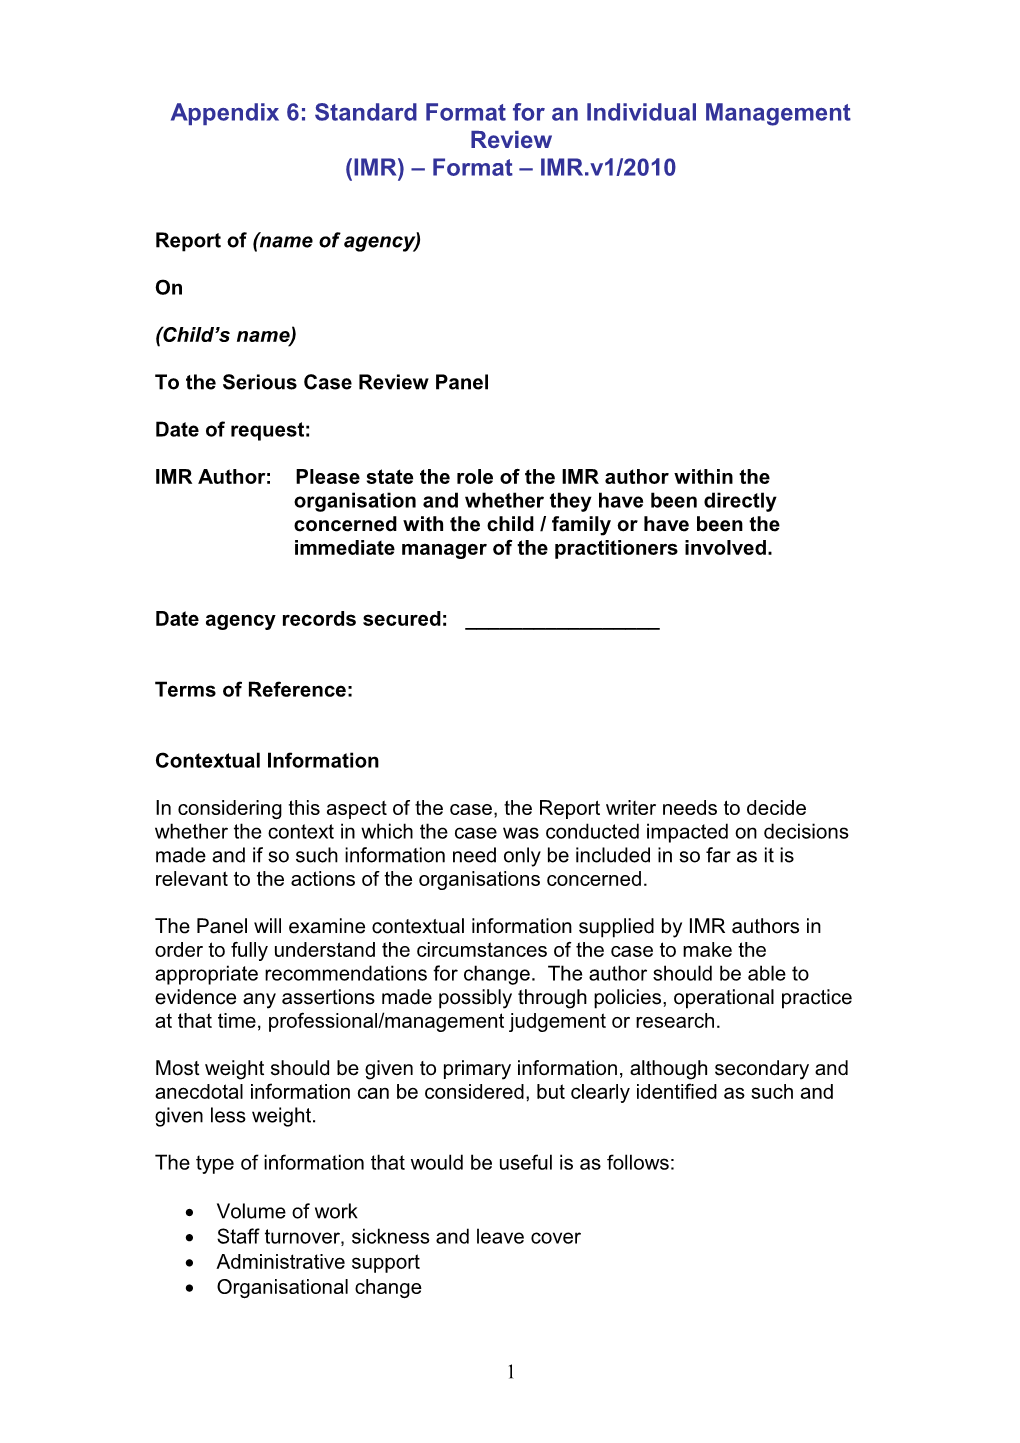 Appendix 6: Standard Format for an Individual Management Review